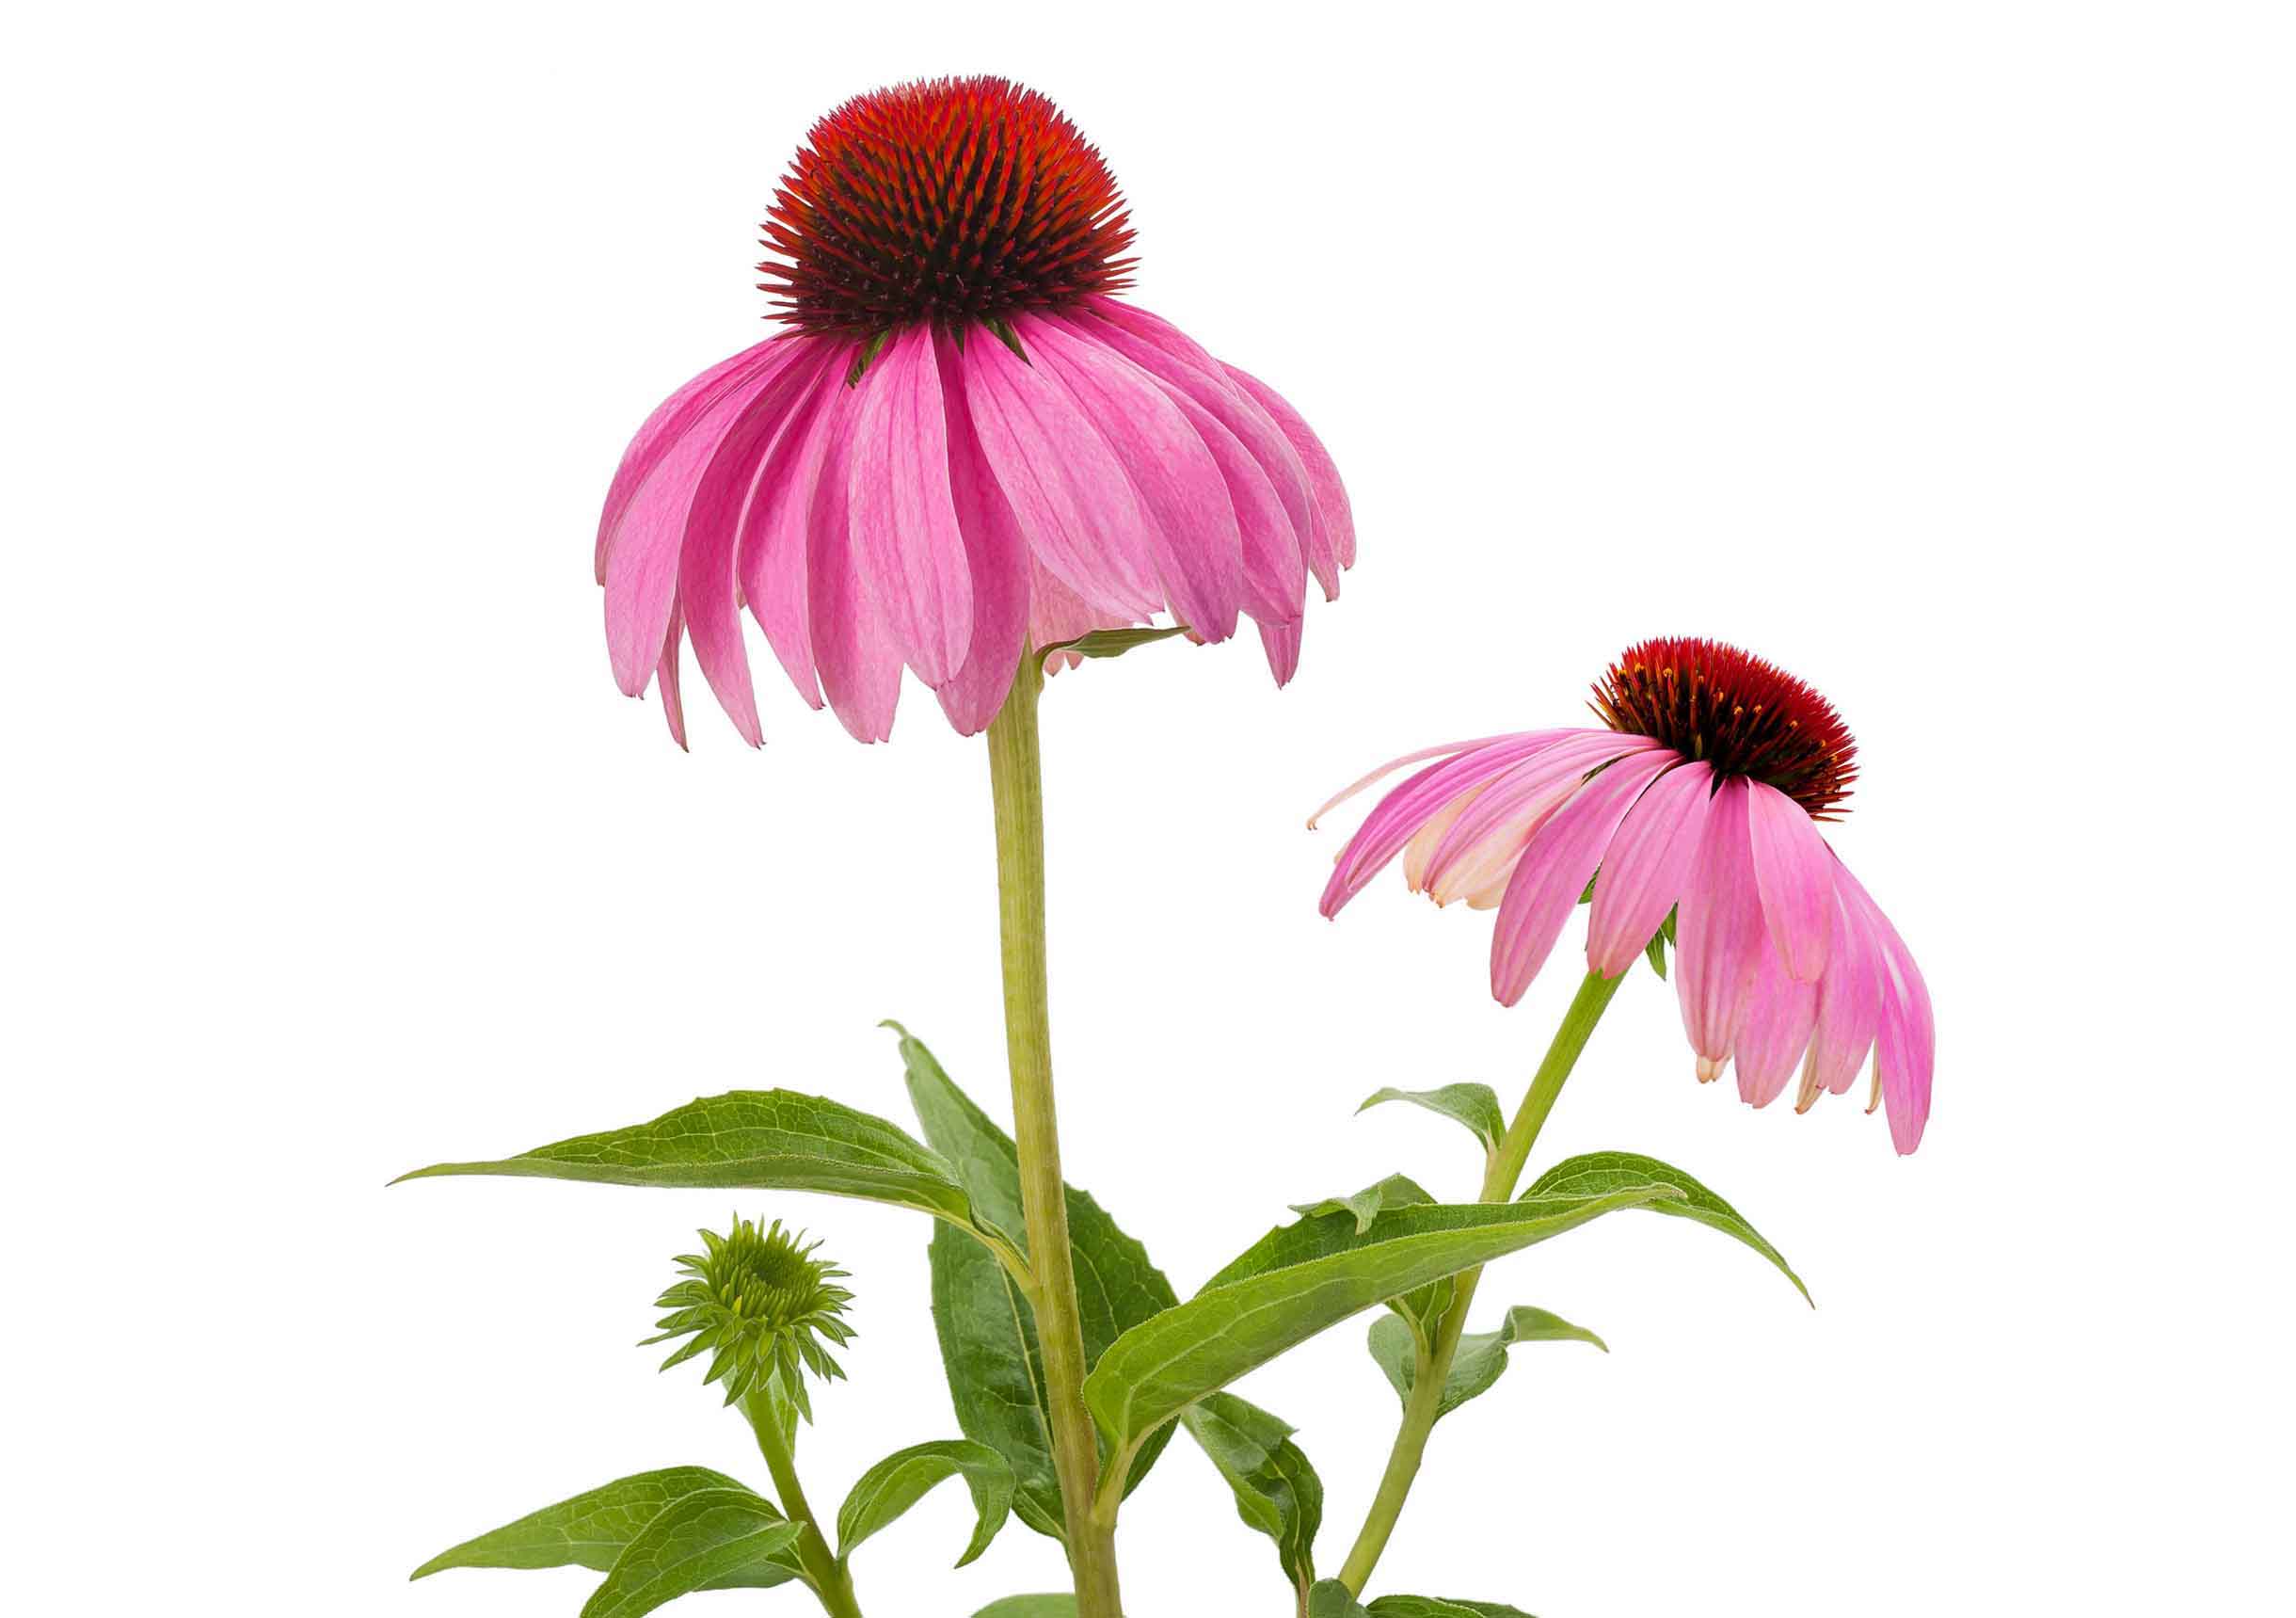 Echinacea: Echinacea has been identified as having anti-inflammatory, antioxidant, and antiviral properties and as an immune-strengthening agent.